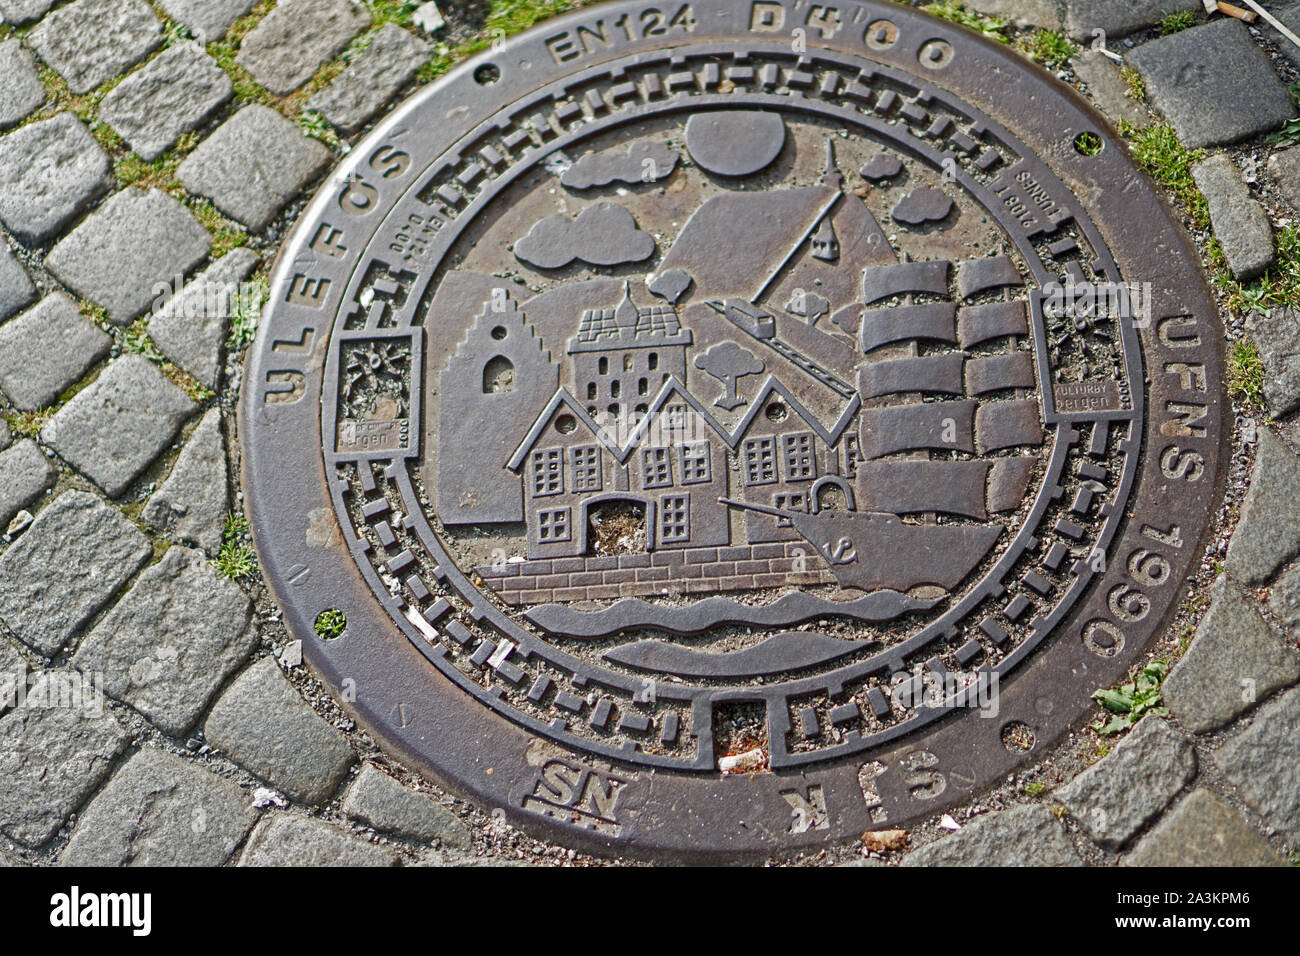 An iron-cast on the floor of a street in Bryggen, Bergen, Norway showing a viking ship and Bryggen houses Stock Photo